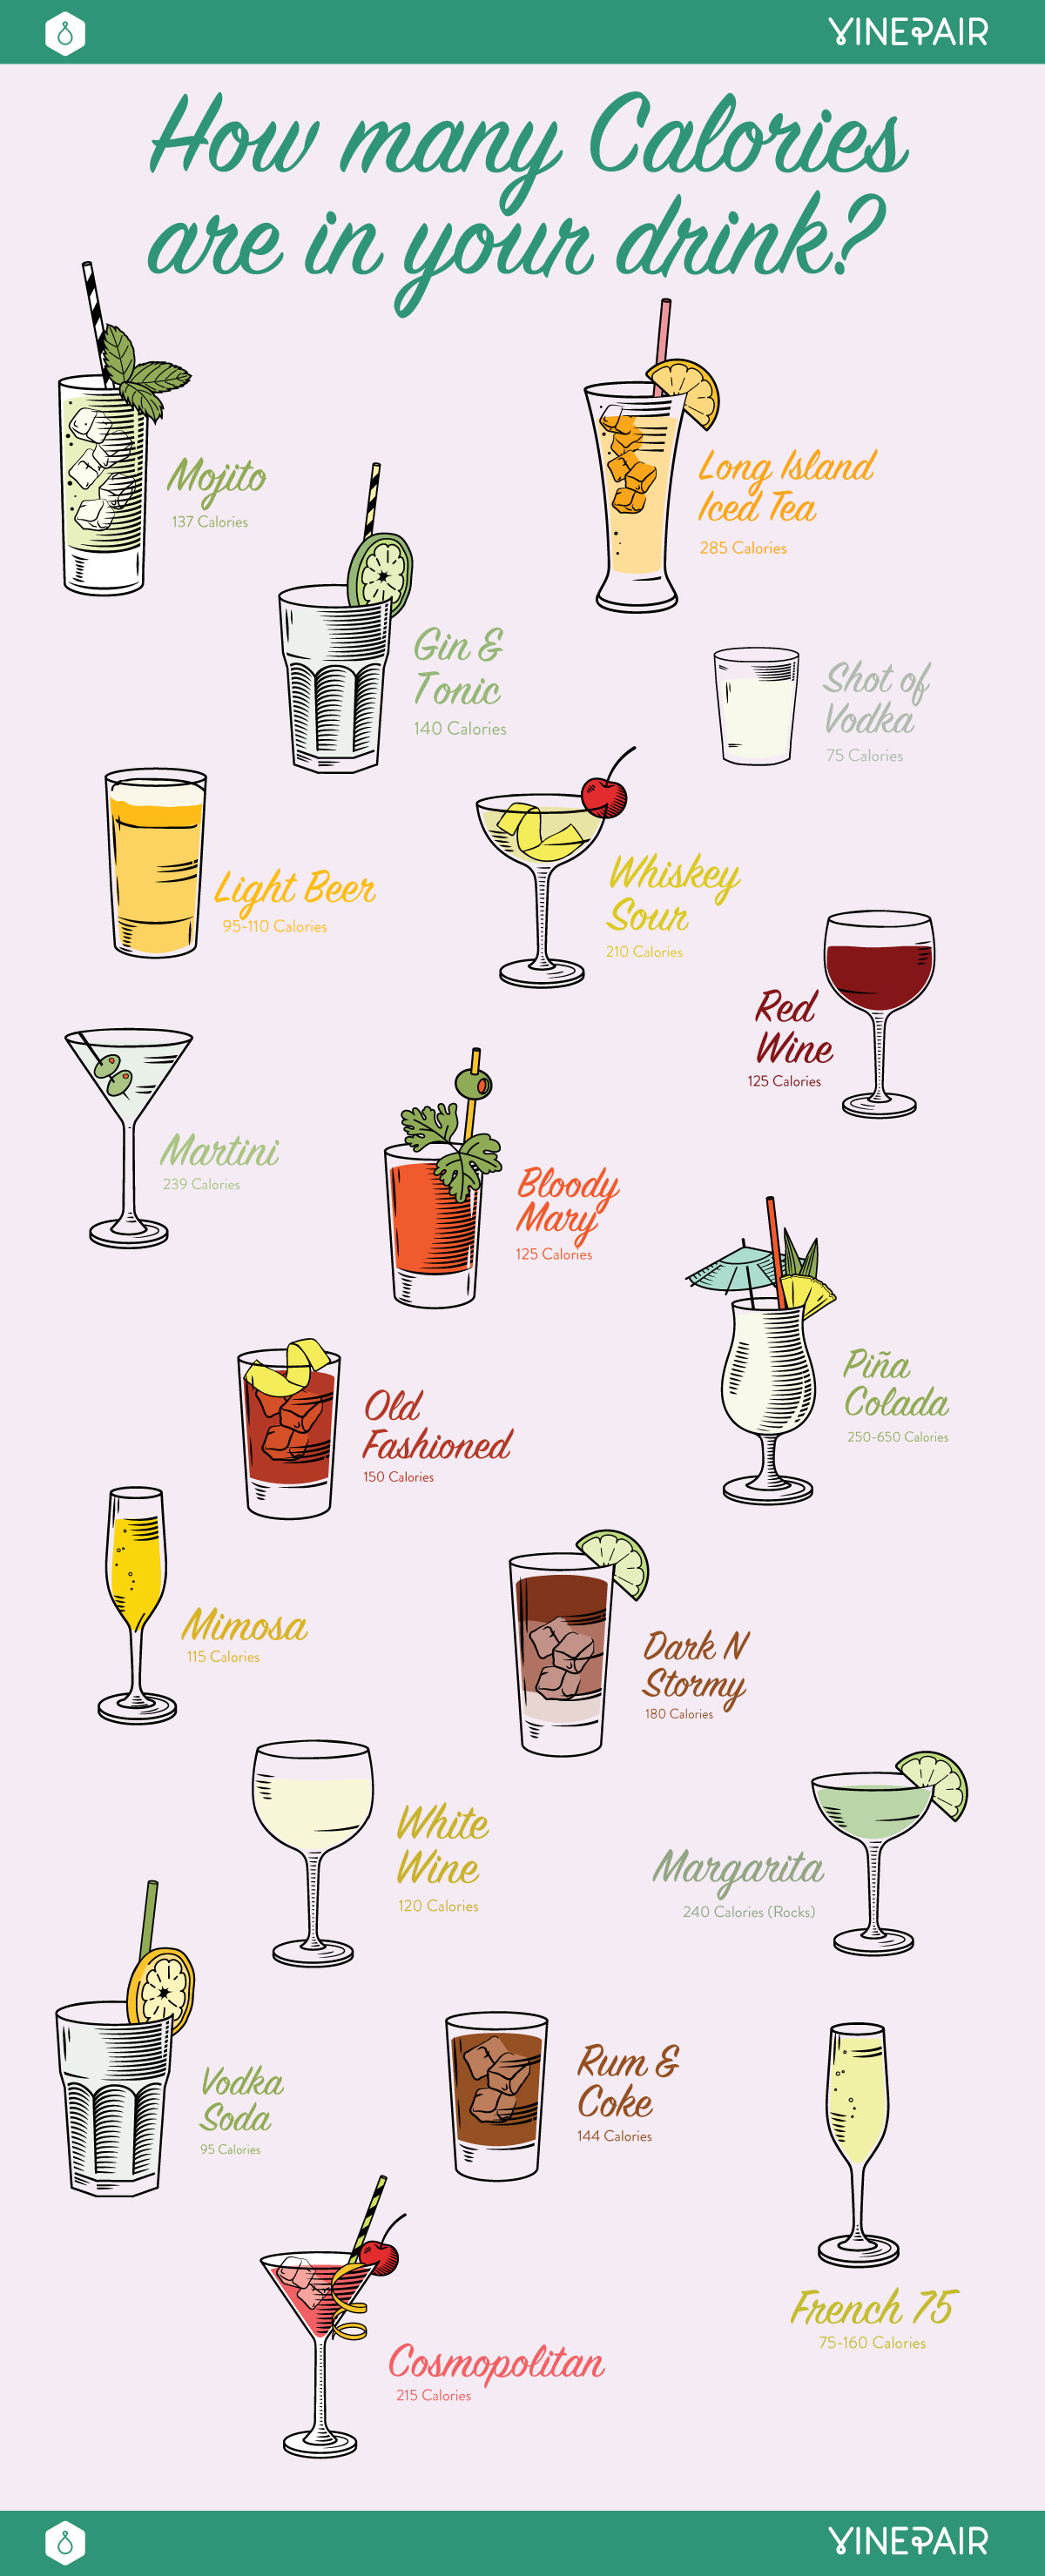 How Many Calories Are in Your Drink?